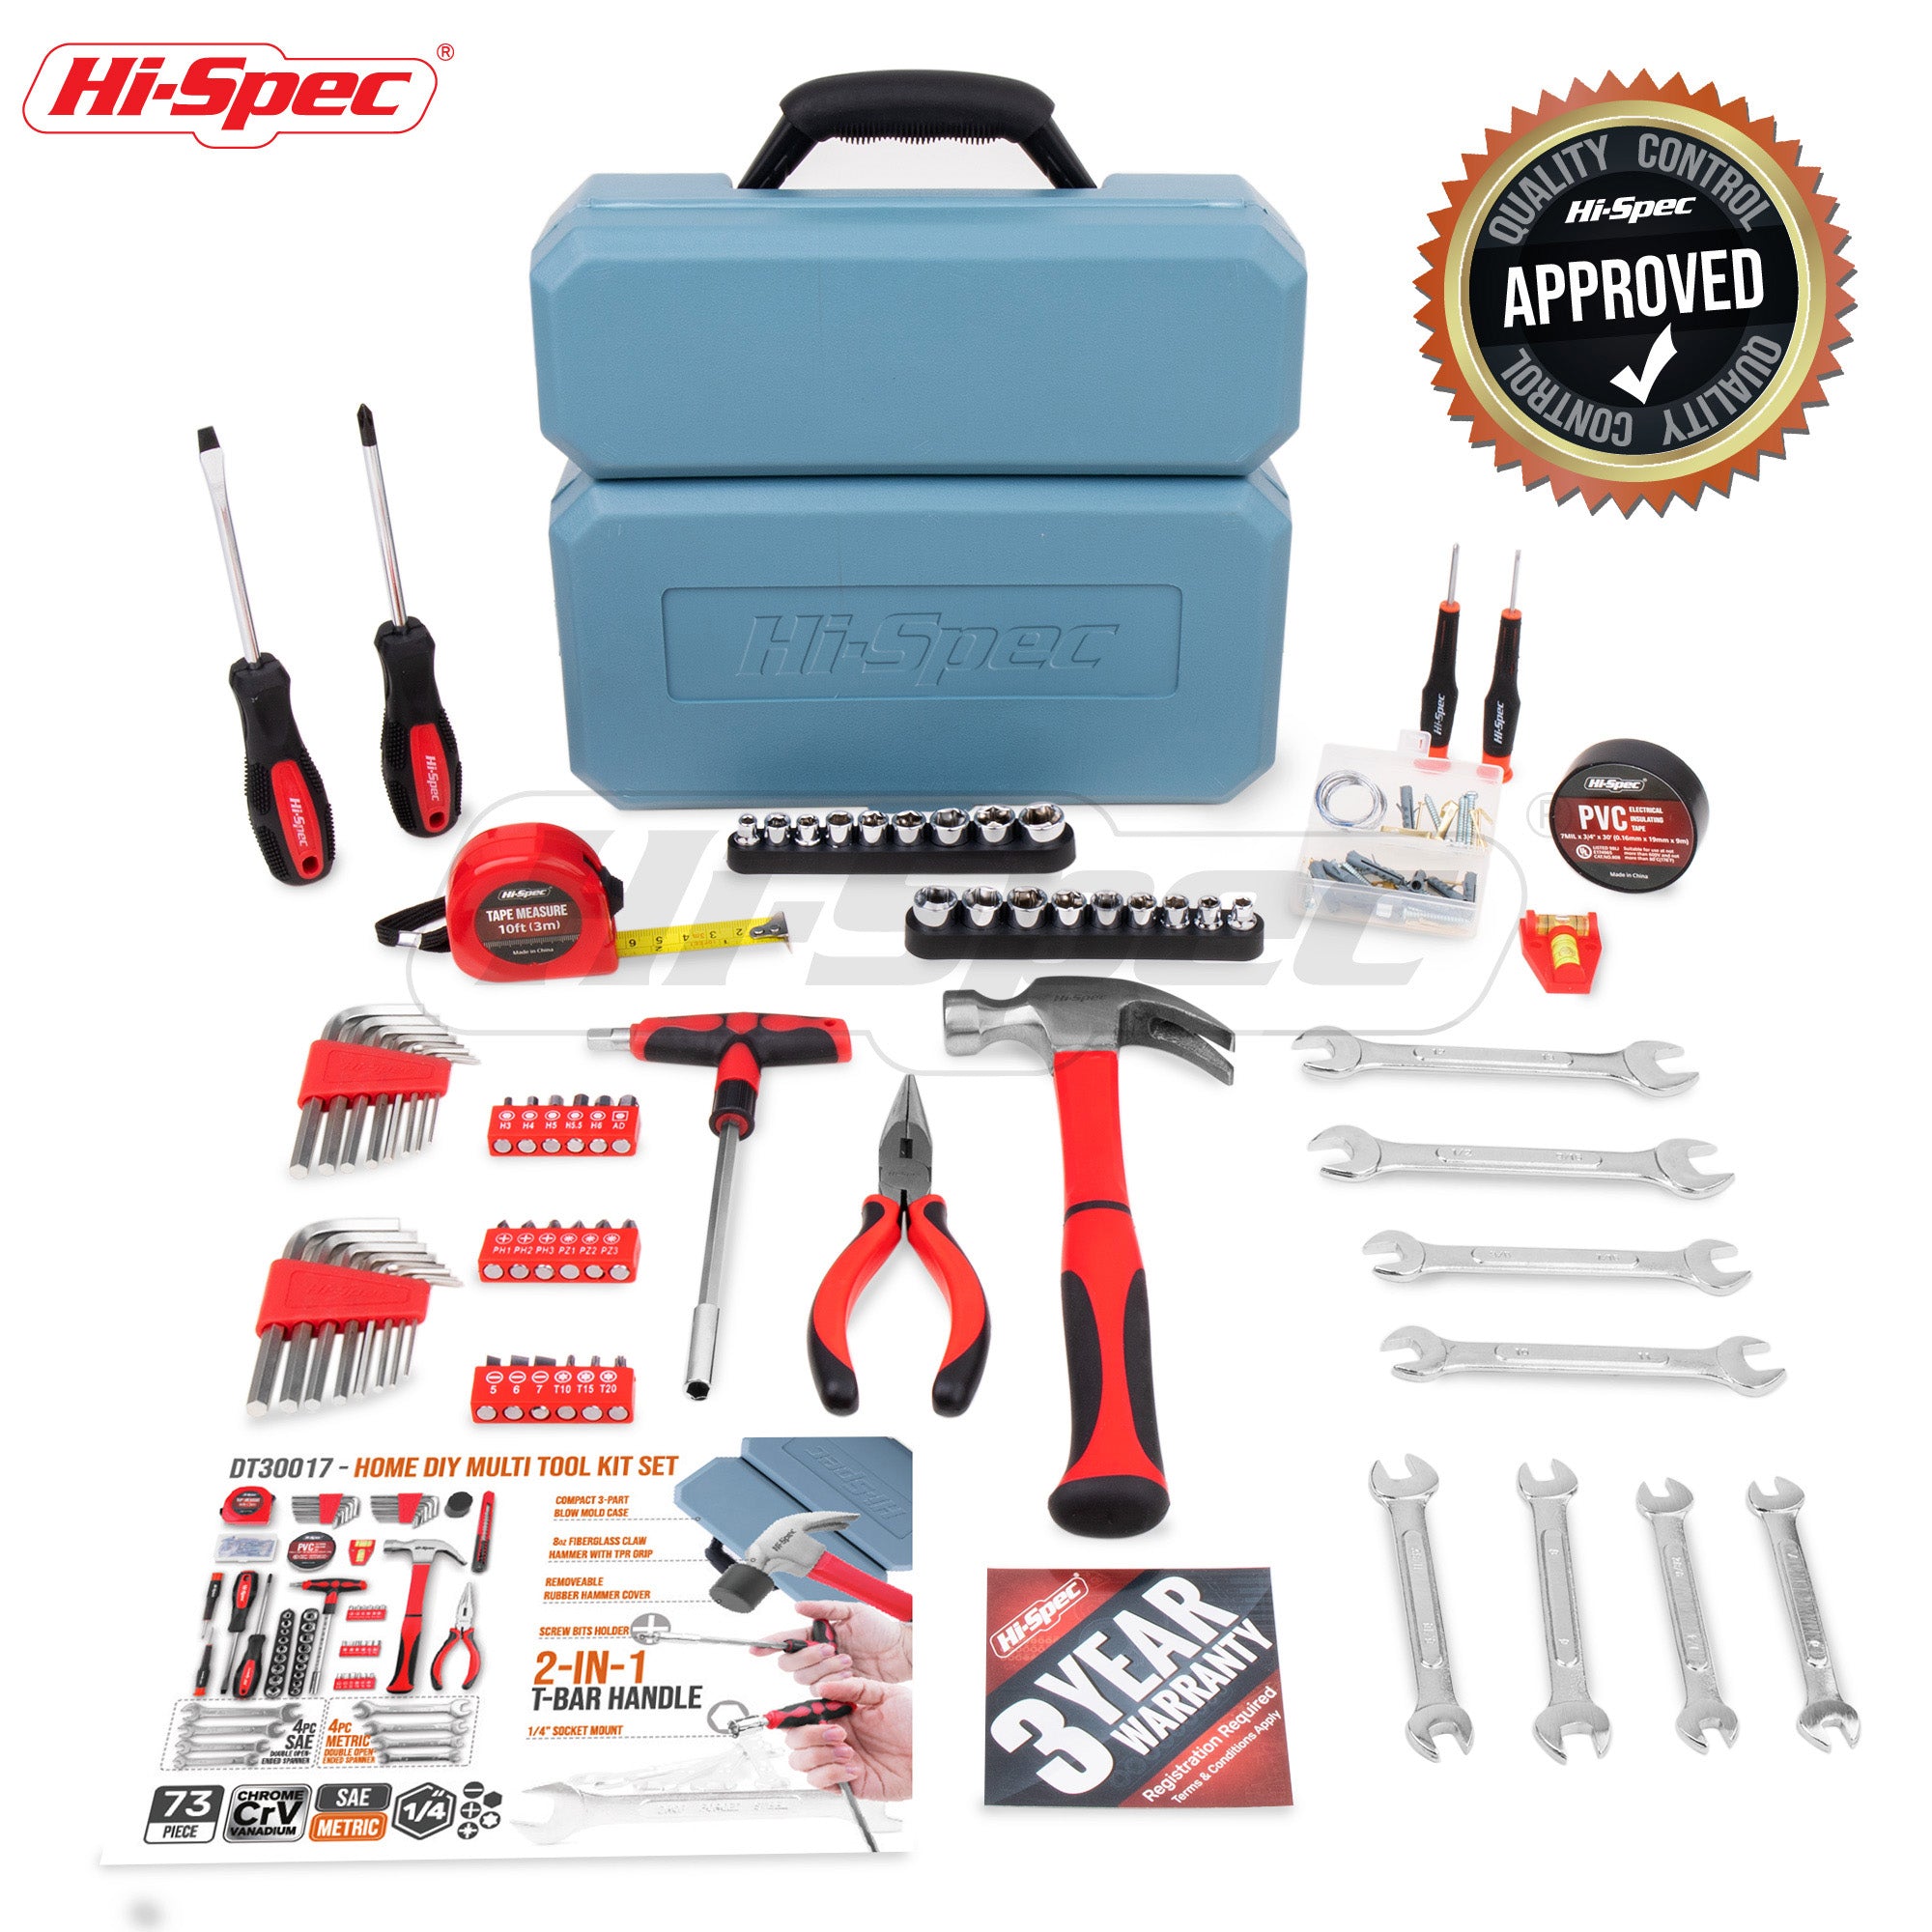 7 Basic Measuring and Layout Tools Every Serious DIY Needs — HI-SPEC® Tools  Official Site